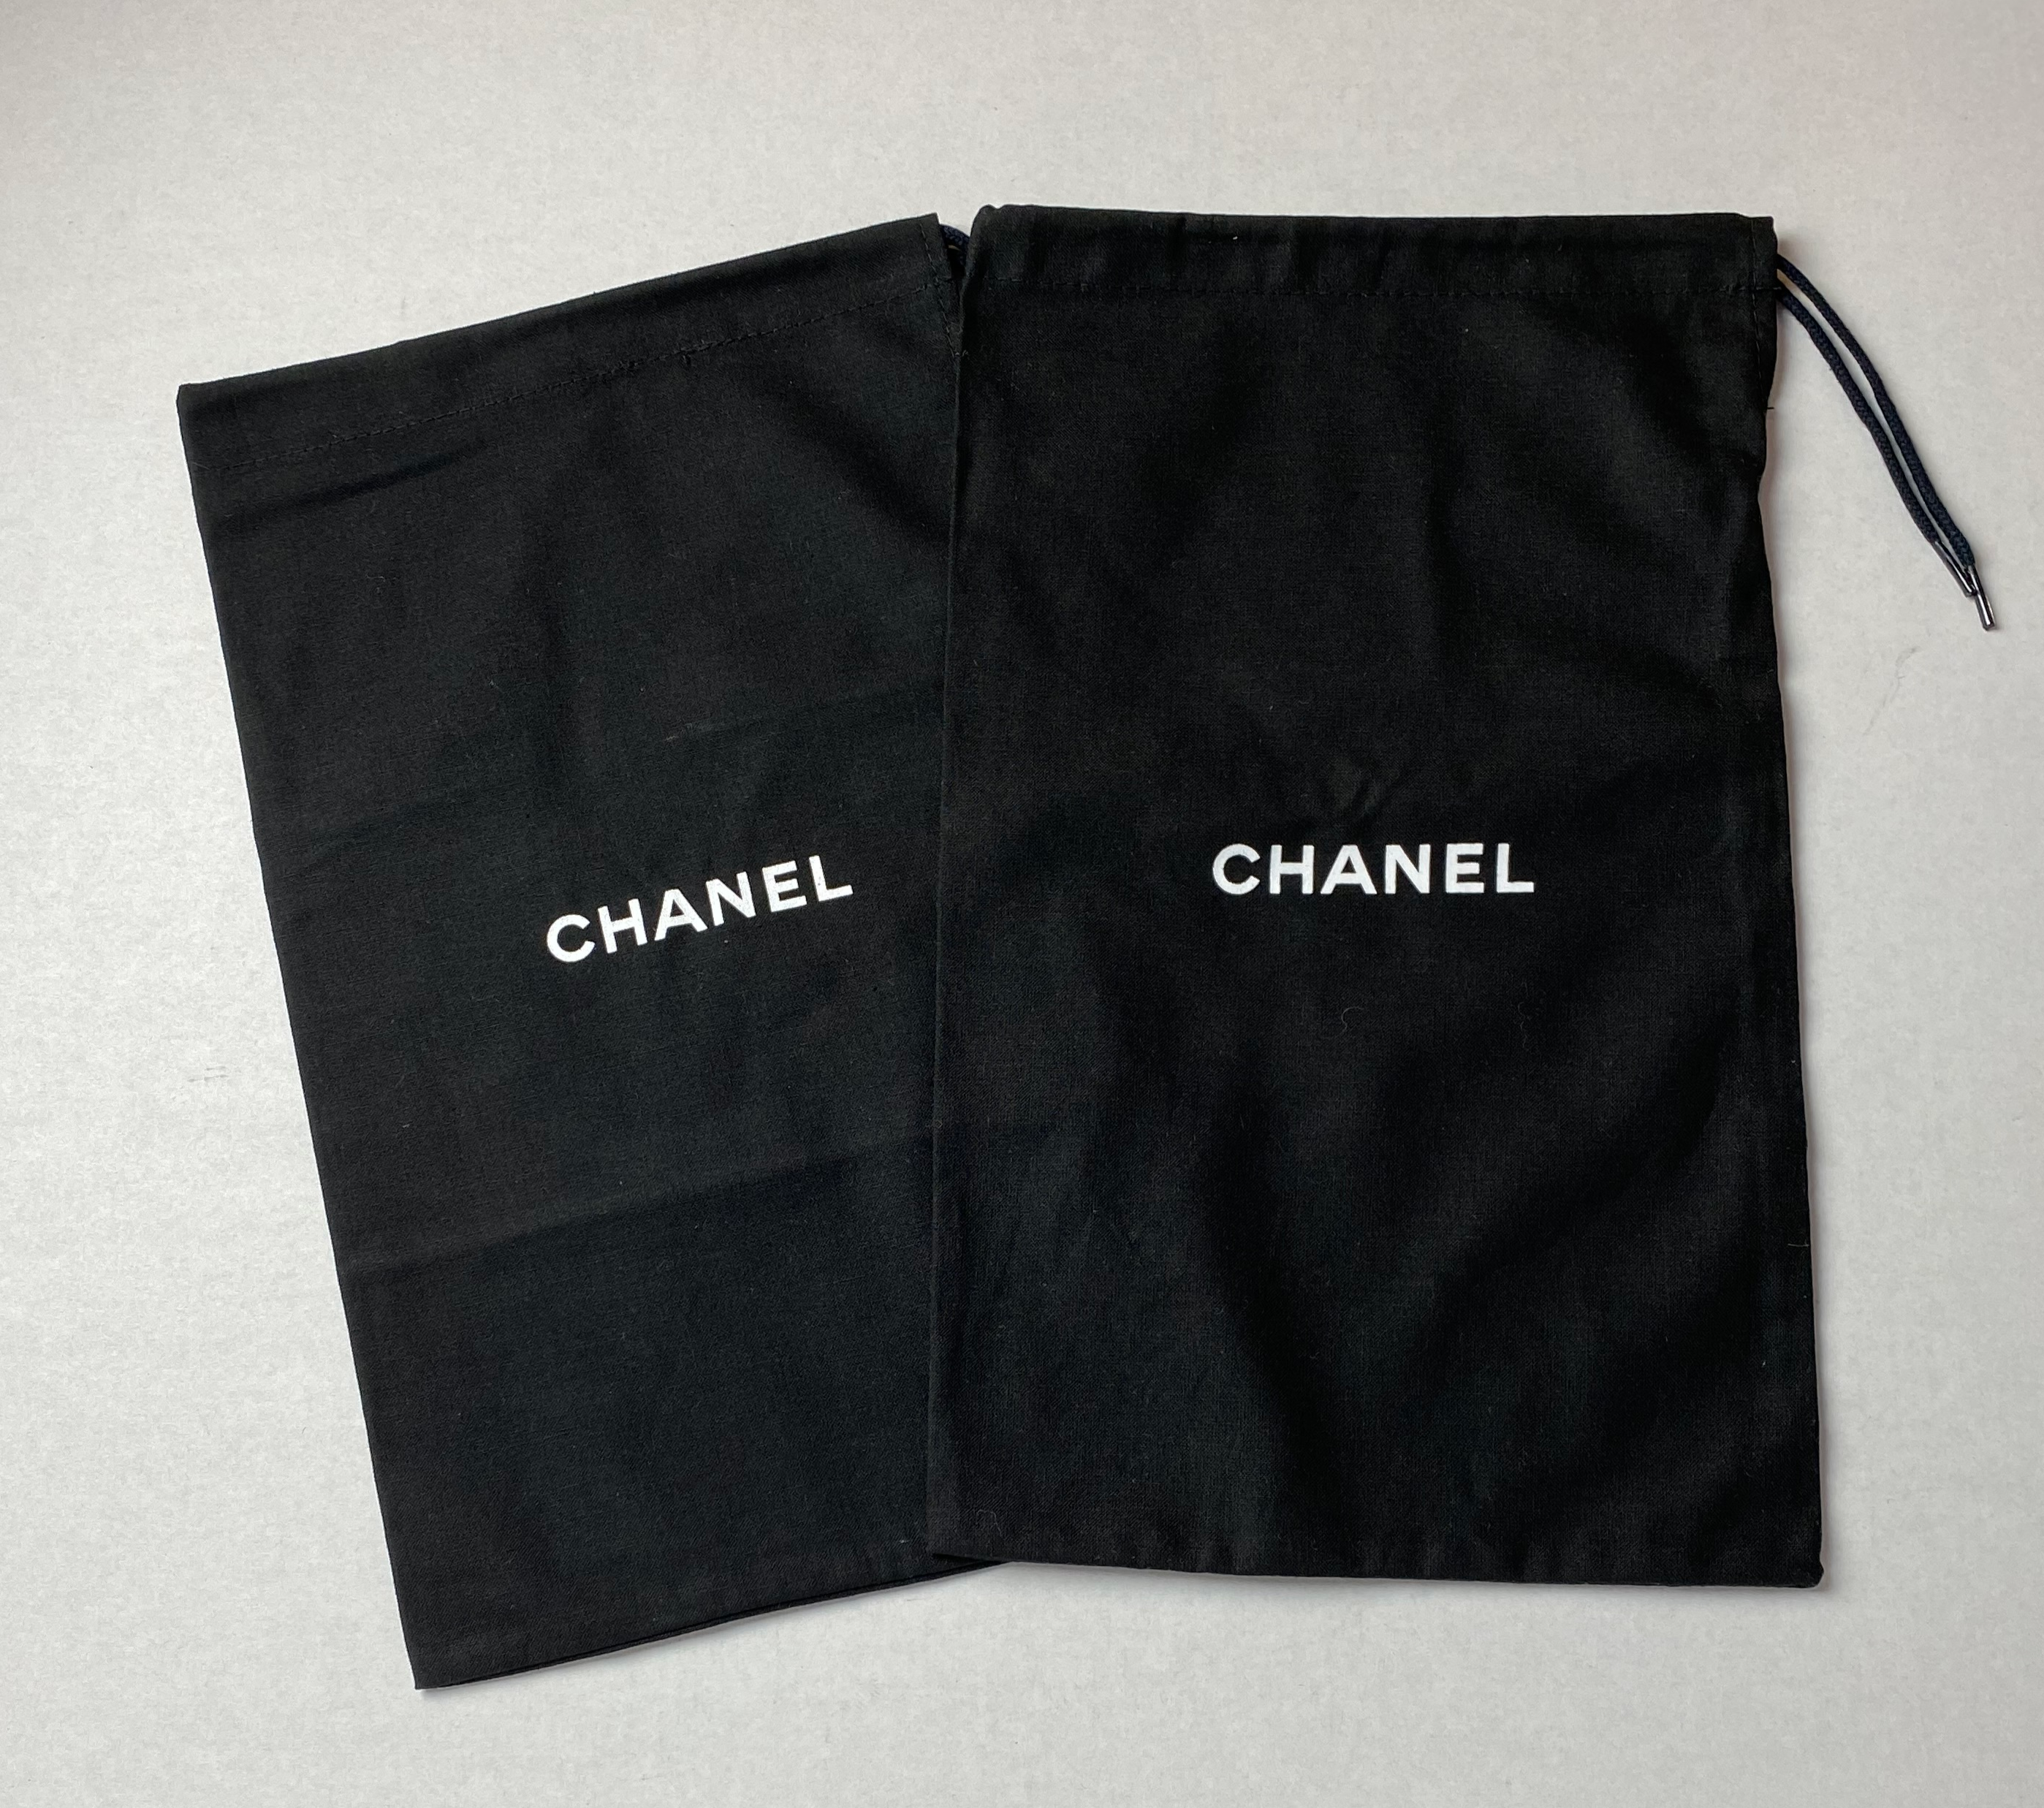 Chanel Dust Bag And Box